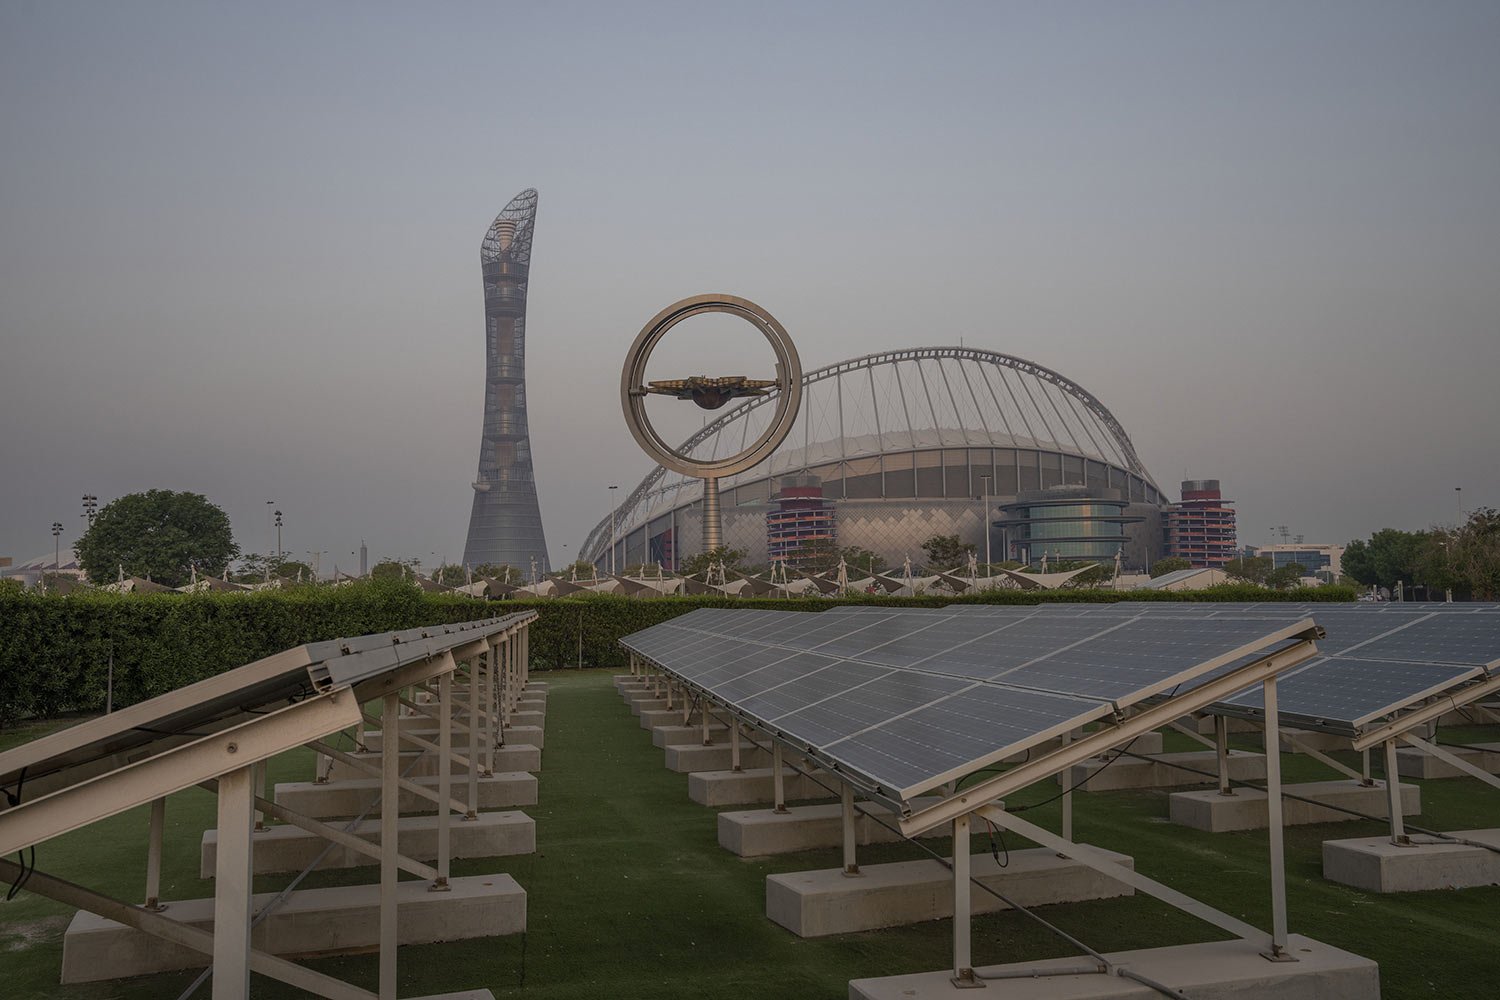  Solar panels stand on grounds in front of Khalifa International Stadium, also known as Qatar's national and oldest stadium, which will host matches during the FIFA World Cup 2022, in Doha, Qatar, Saturday, Oct. 15, 2022. (AP Photo/Nariman El-Mofty) 